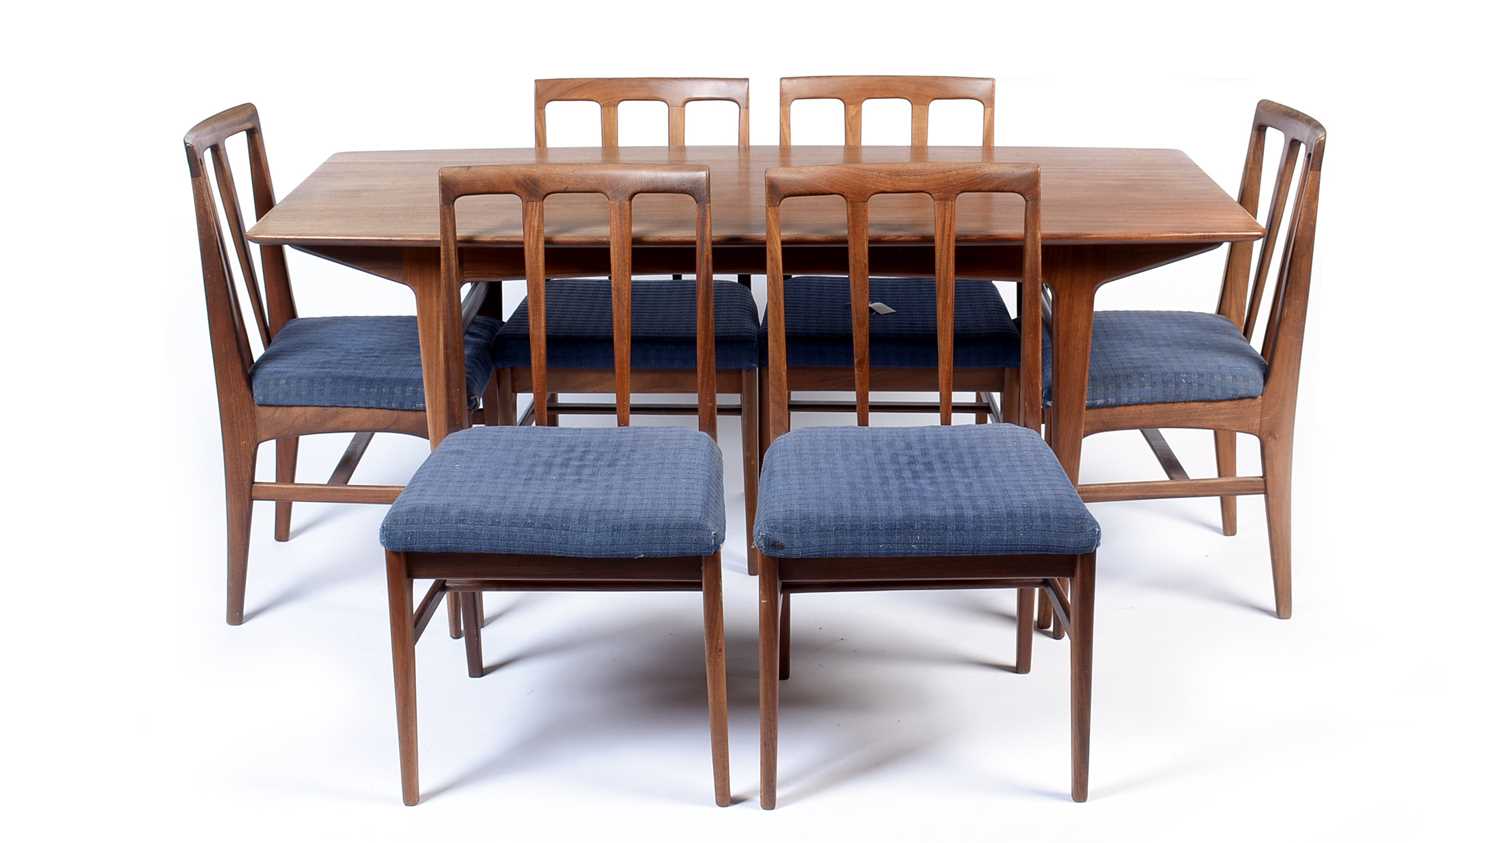 John Herbert for A. Younger Ltd: a mid Century Volnay range dining room suite. - Image 3 of 25